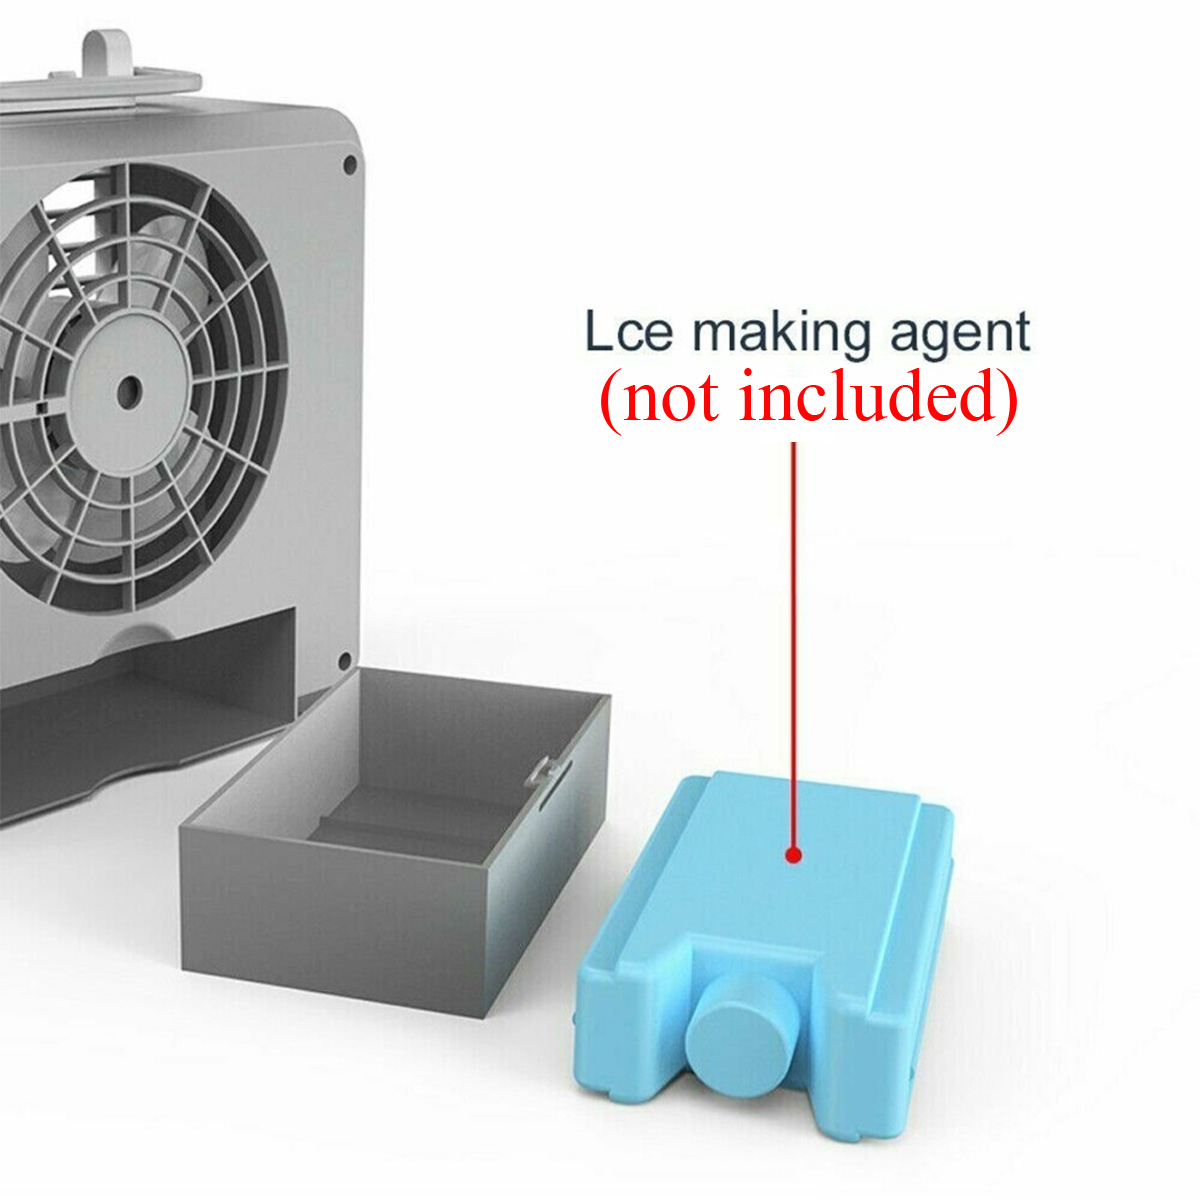 Portable-Mini-Air-Conditioner-Water-Cool-Cooling-Fan-Cooler-Humidifier-Purifier-1708376-5